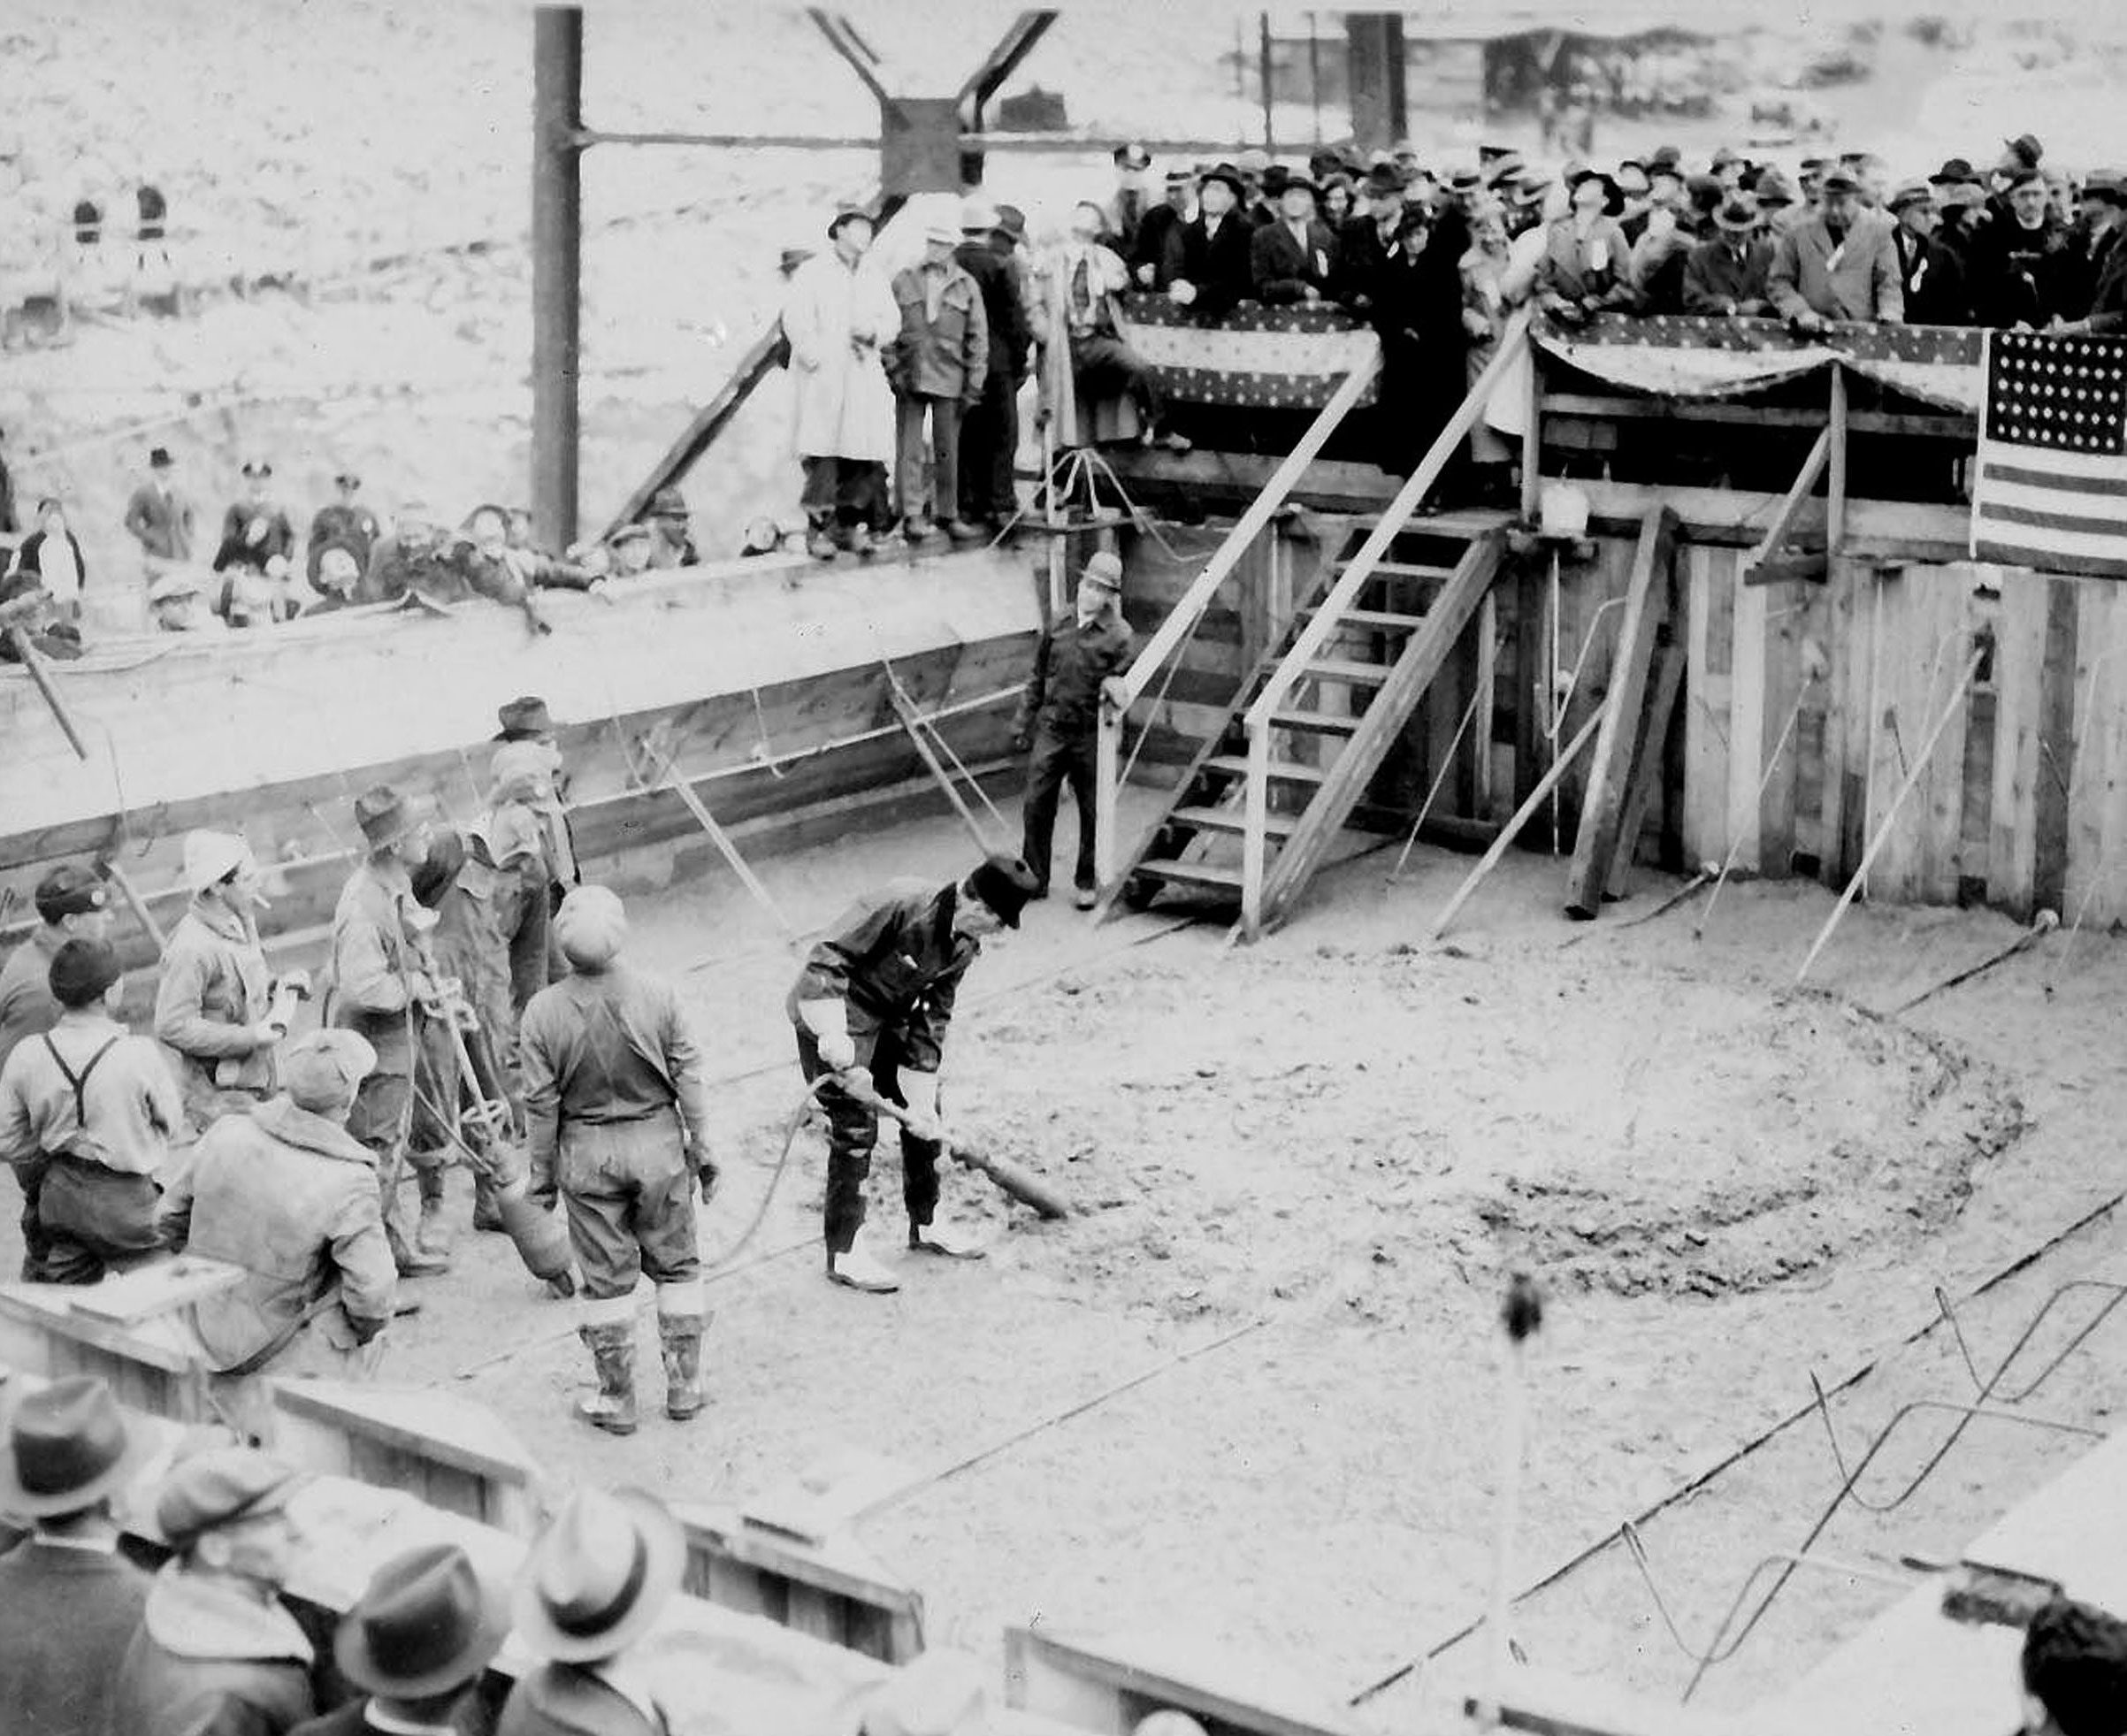 December 6, 1935. Governor Clarence C. Martin vibrating first official concrete pour at Grand Coulee Dam.